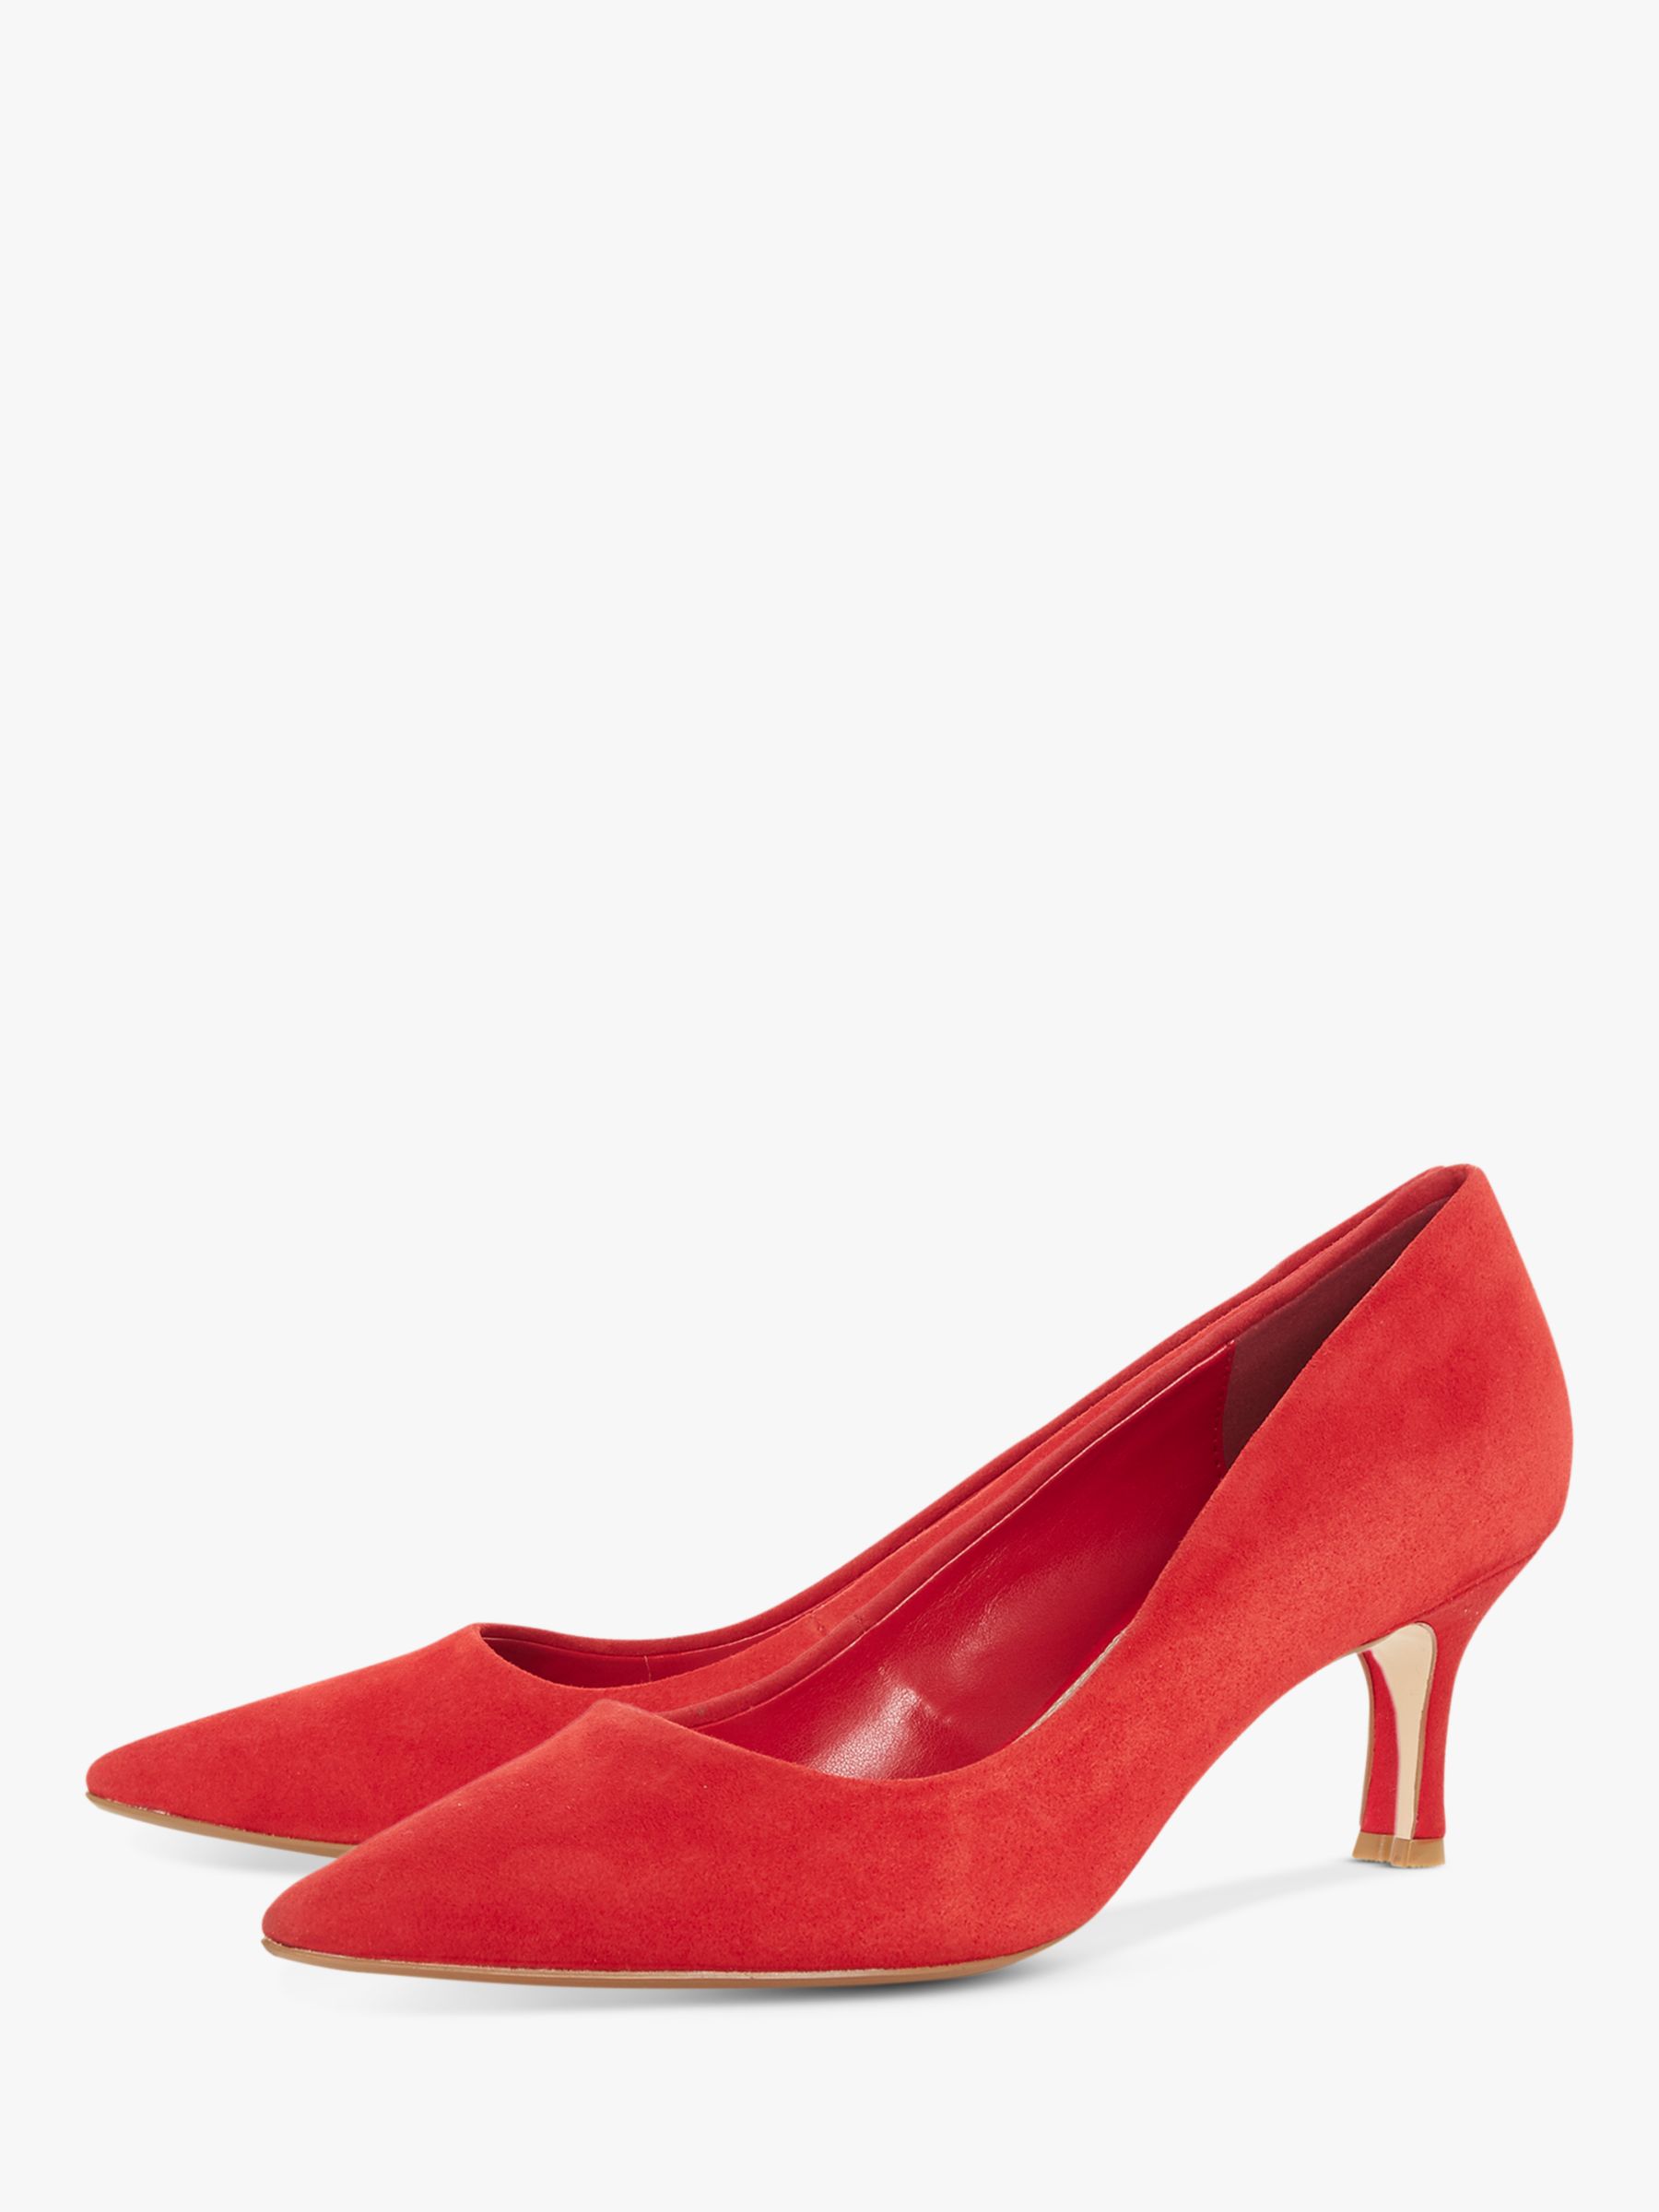 Dune Astal Pointed Toe Court Shoes, Red Suede